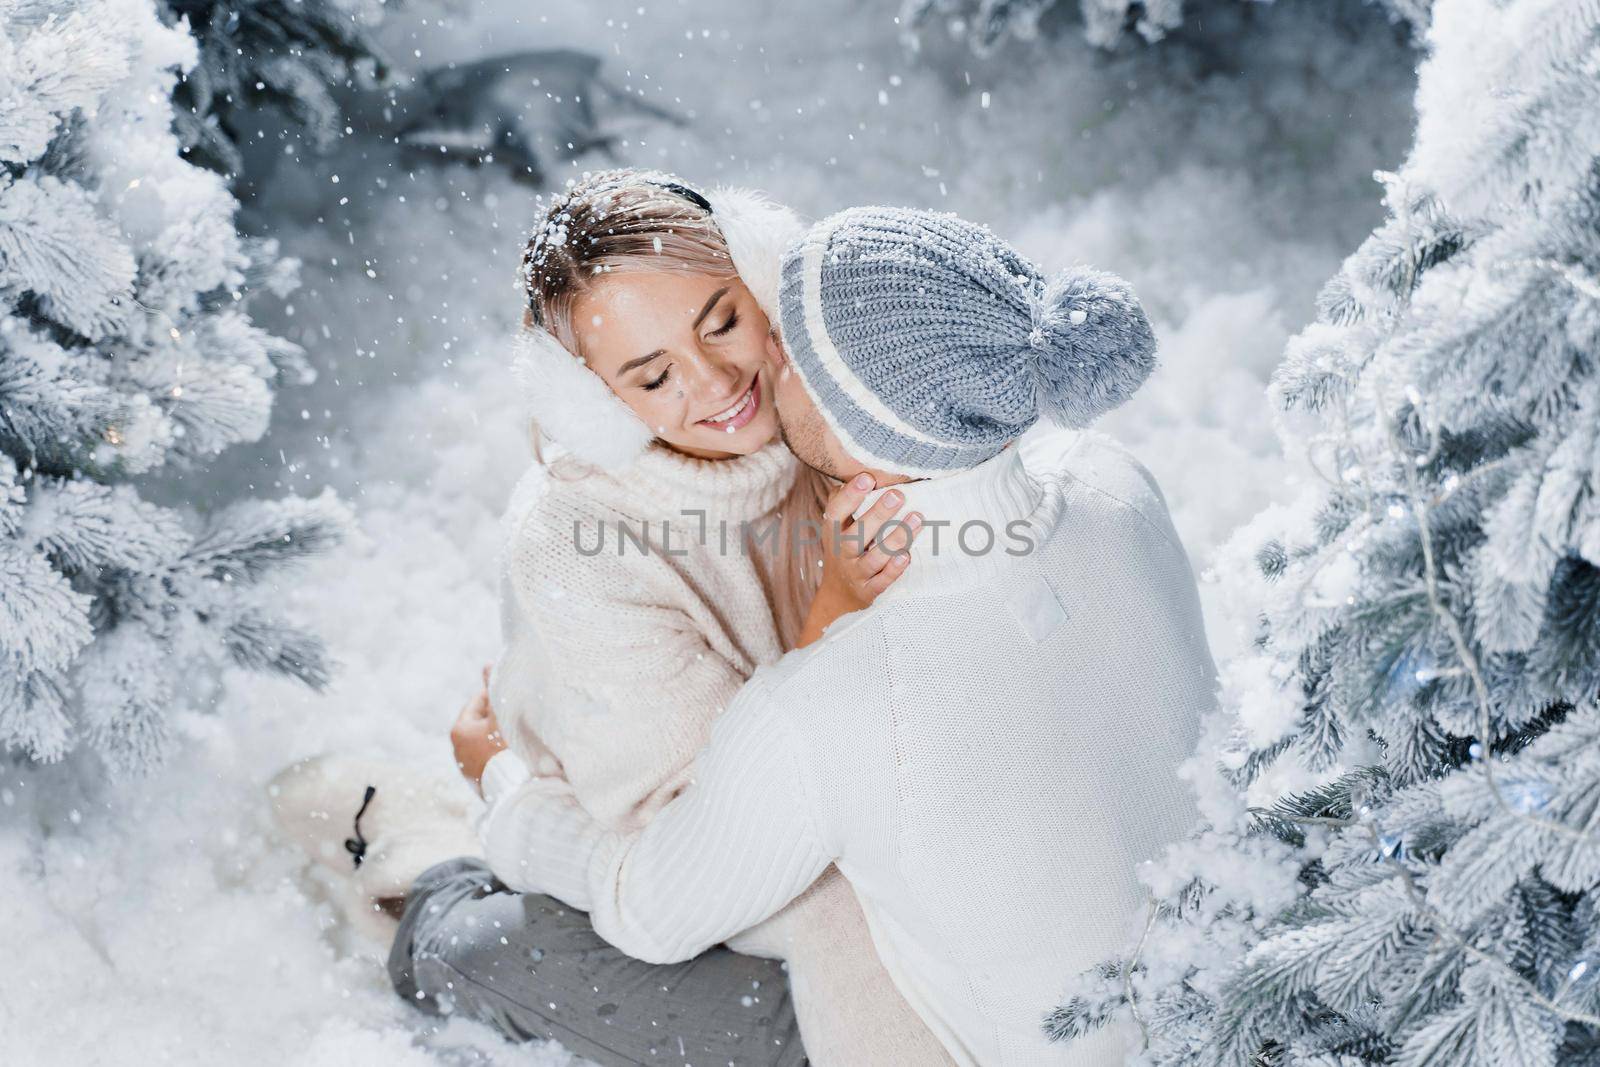 Man kiss and hug his woman and snow falls. New year love story. People weared wearing fur headphones, hats, white sweaters by Rabizo